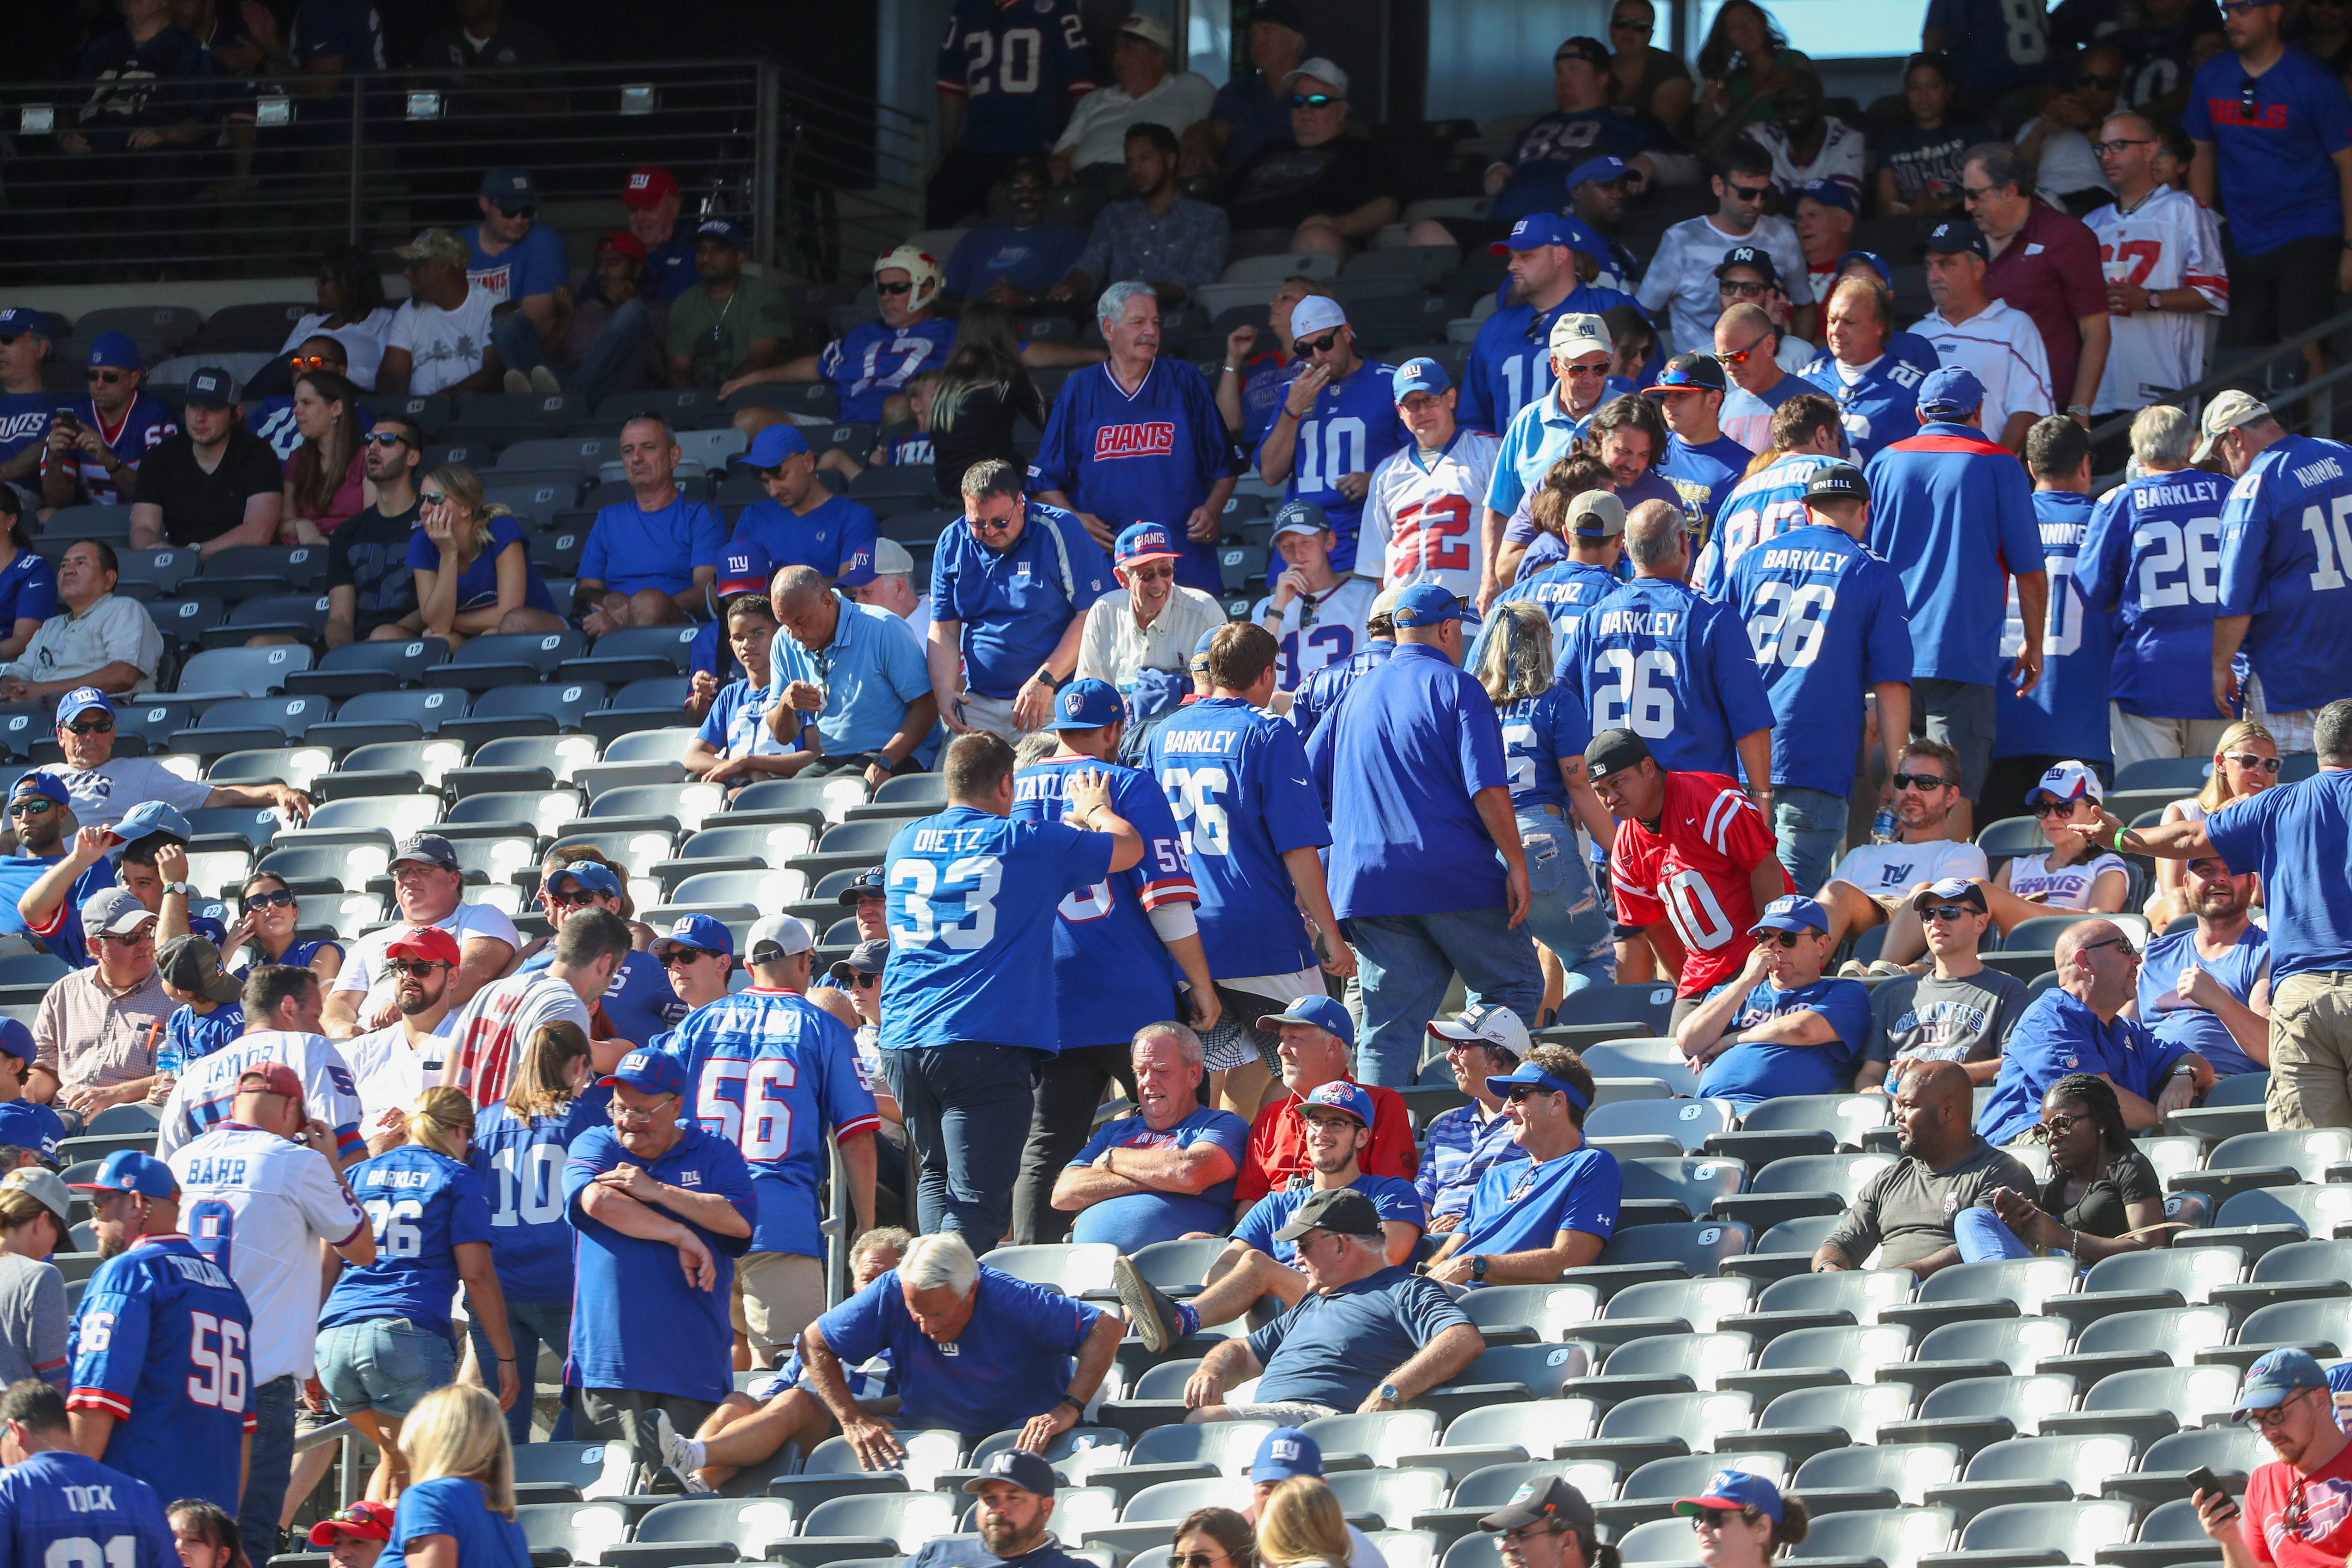 Giants, Jets will have full capacity crowds in 2021